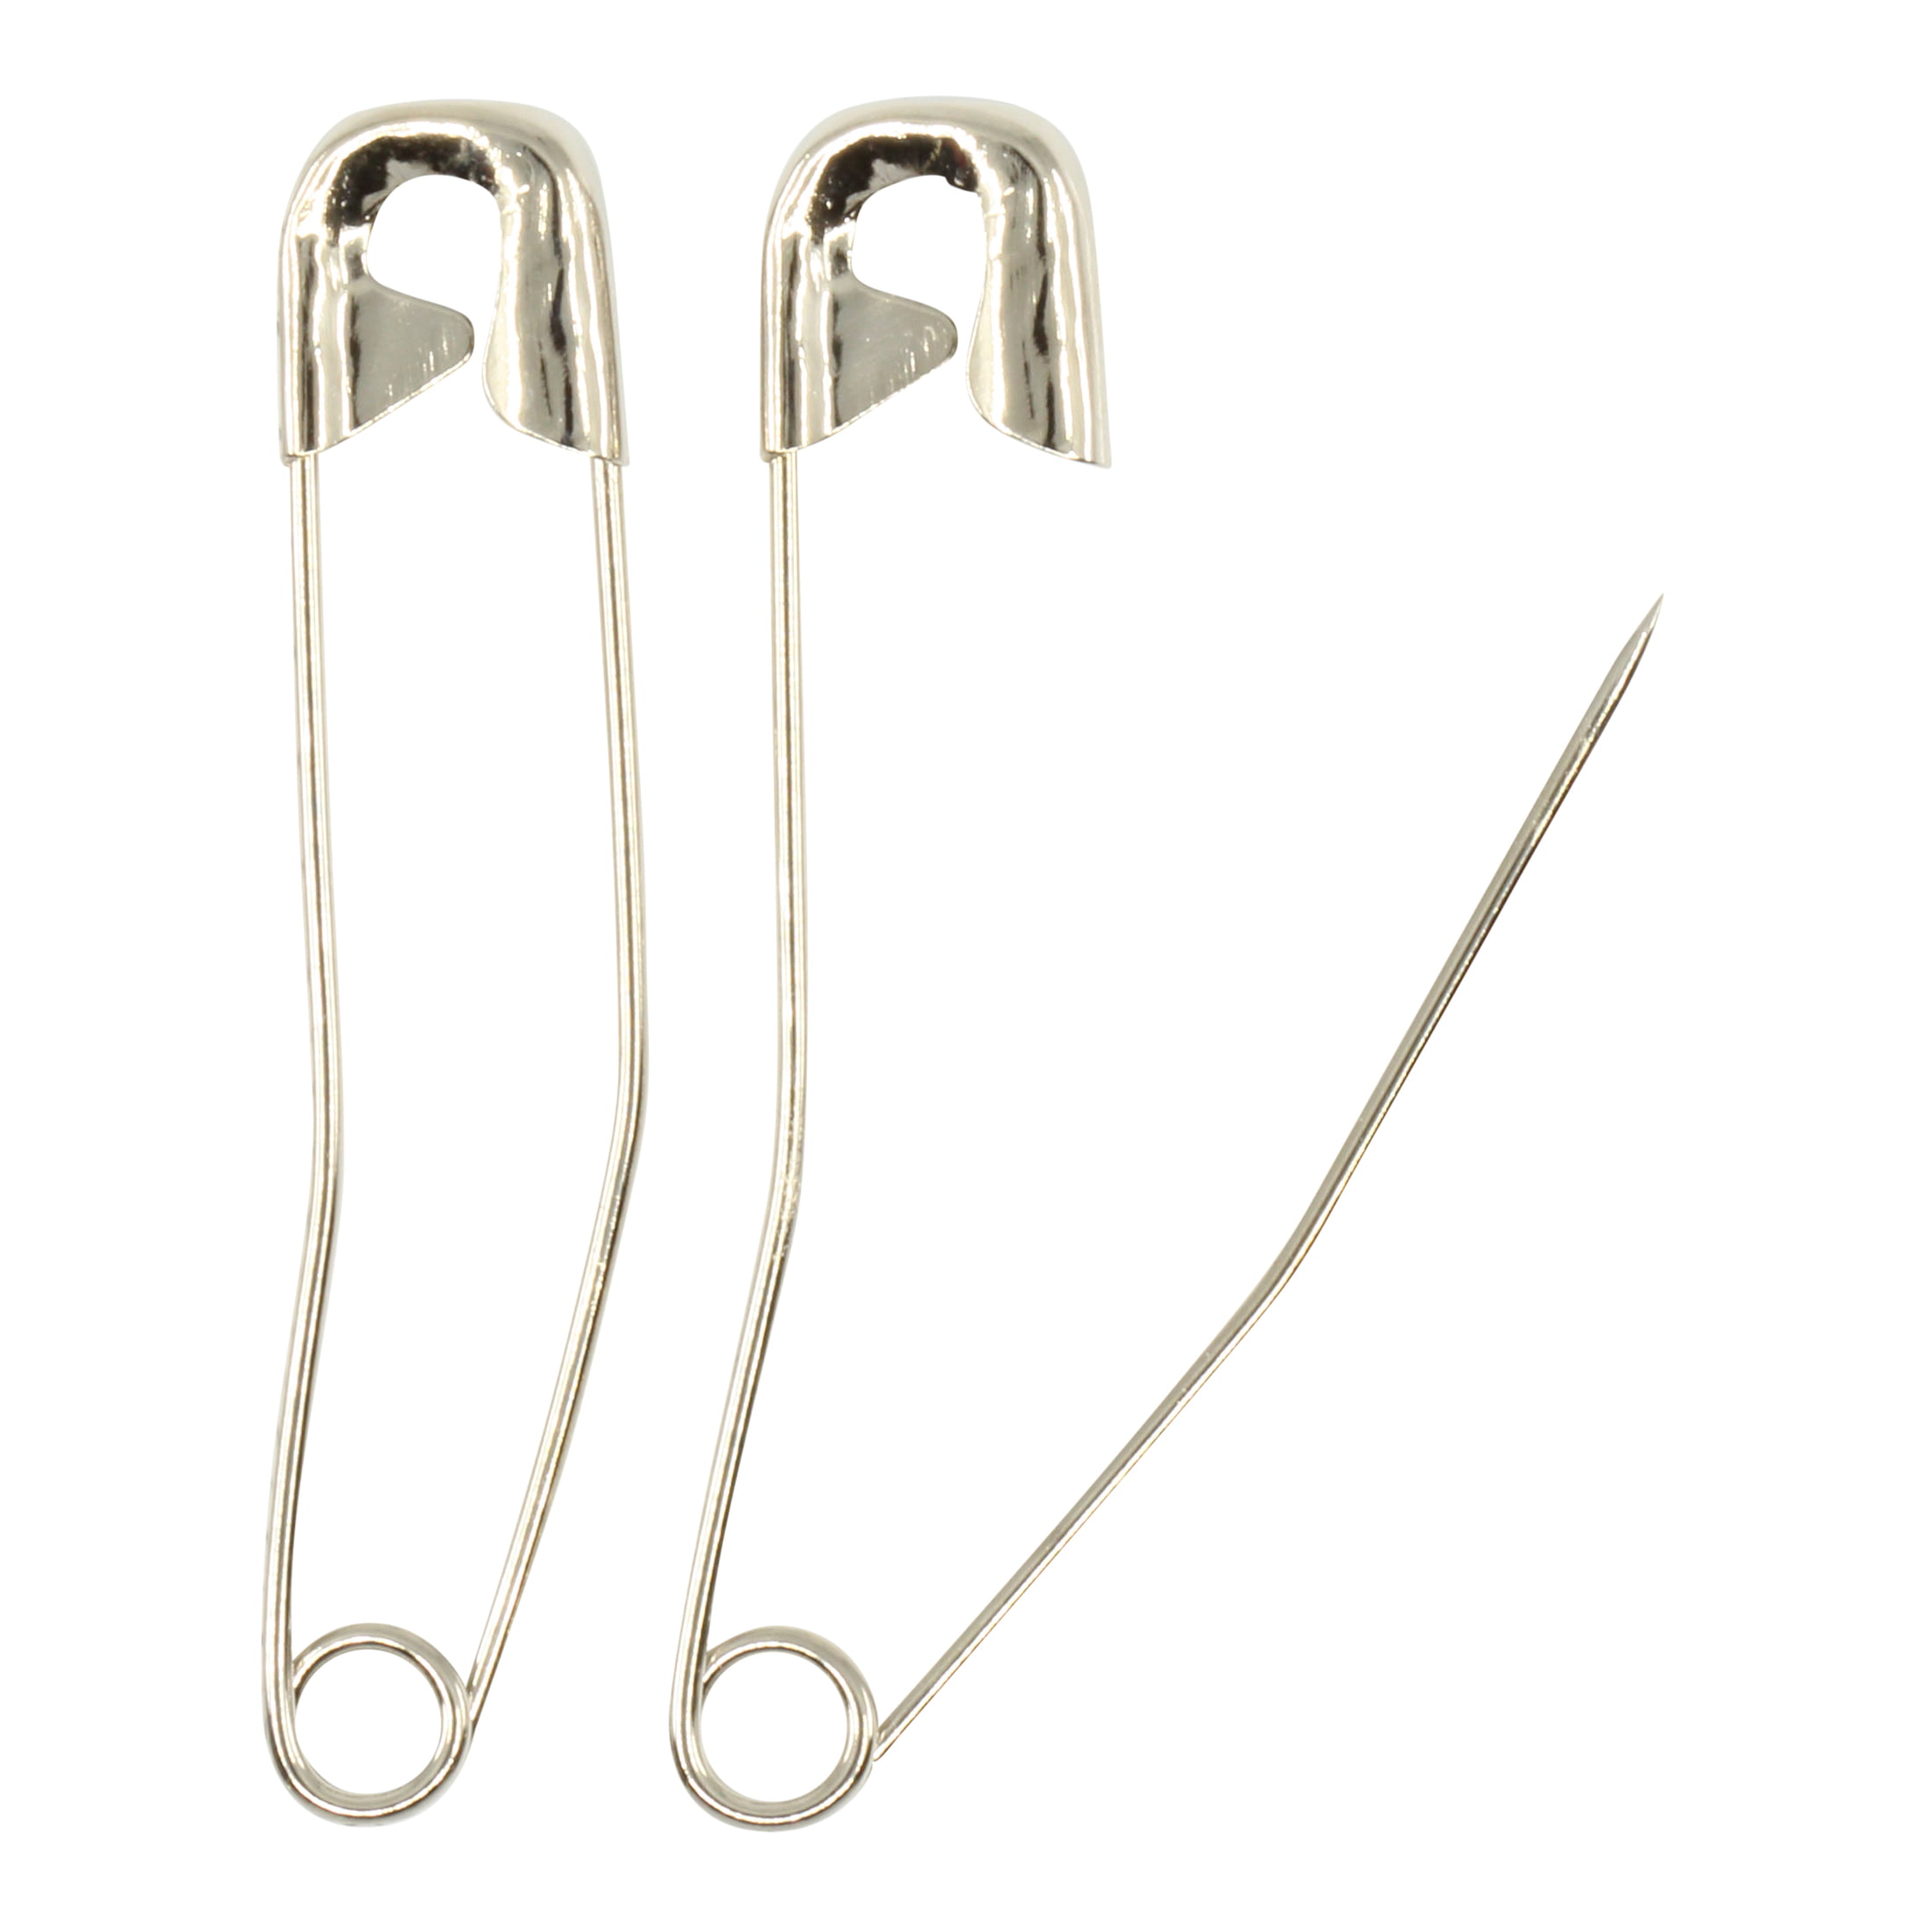 Dritz Diaper Pins with Metal Locking Head- 2 sets (4 Pieces